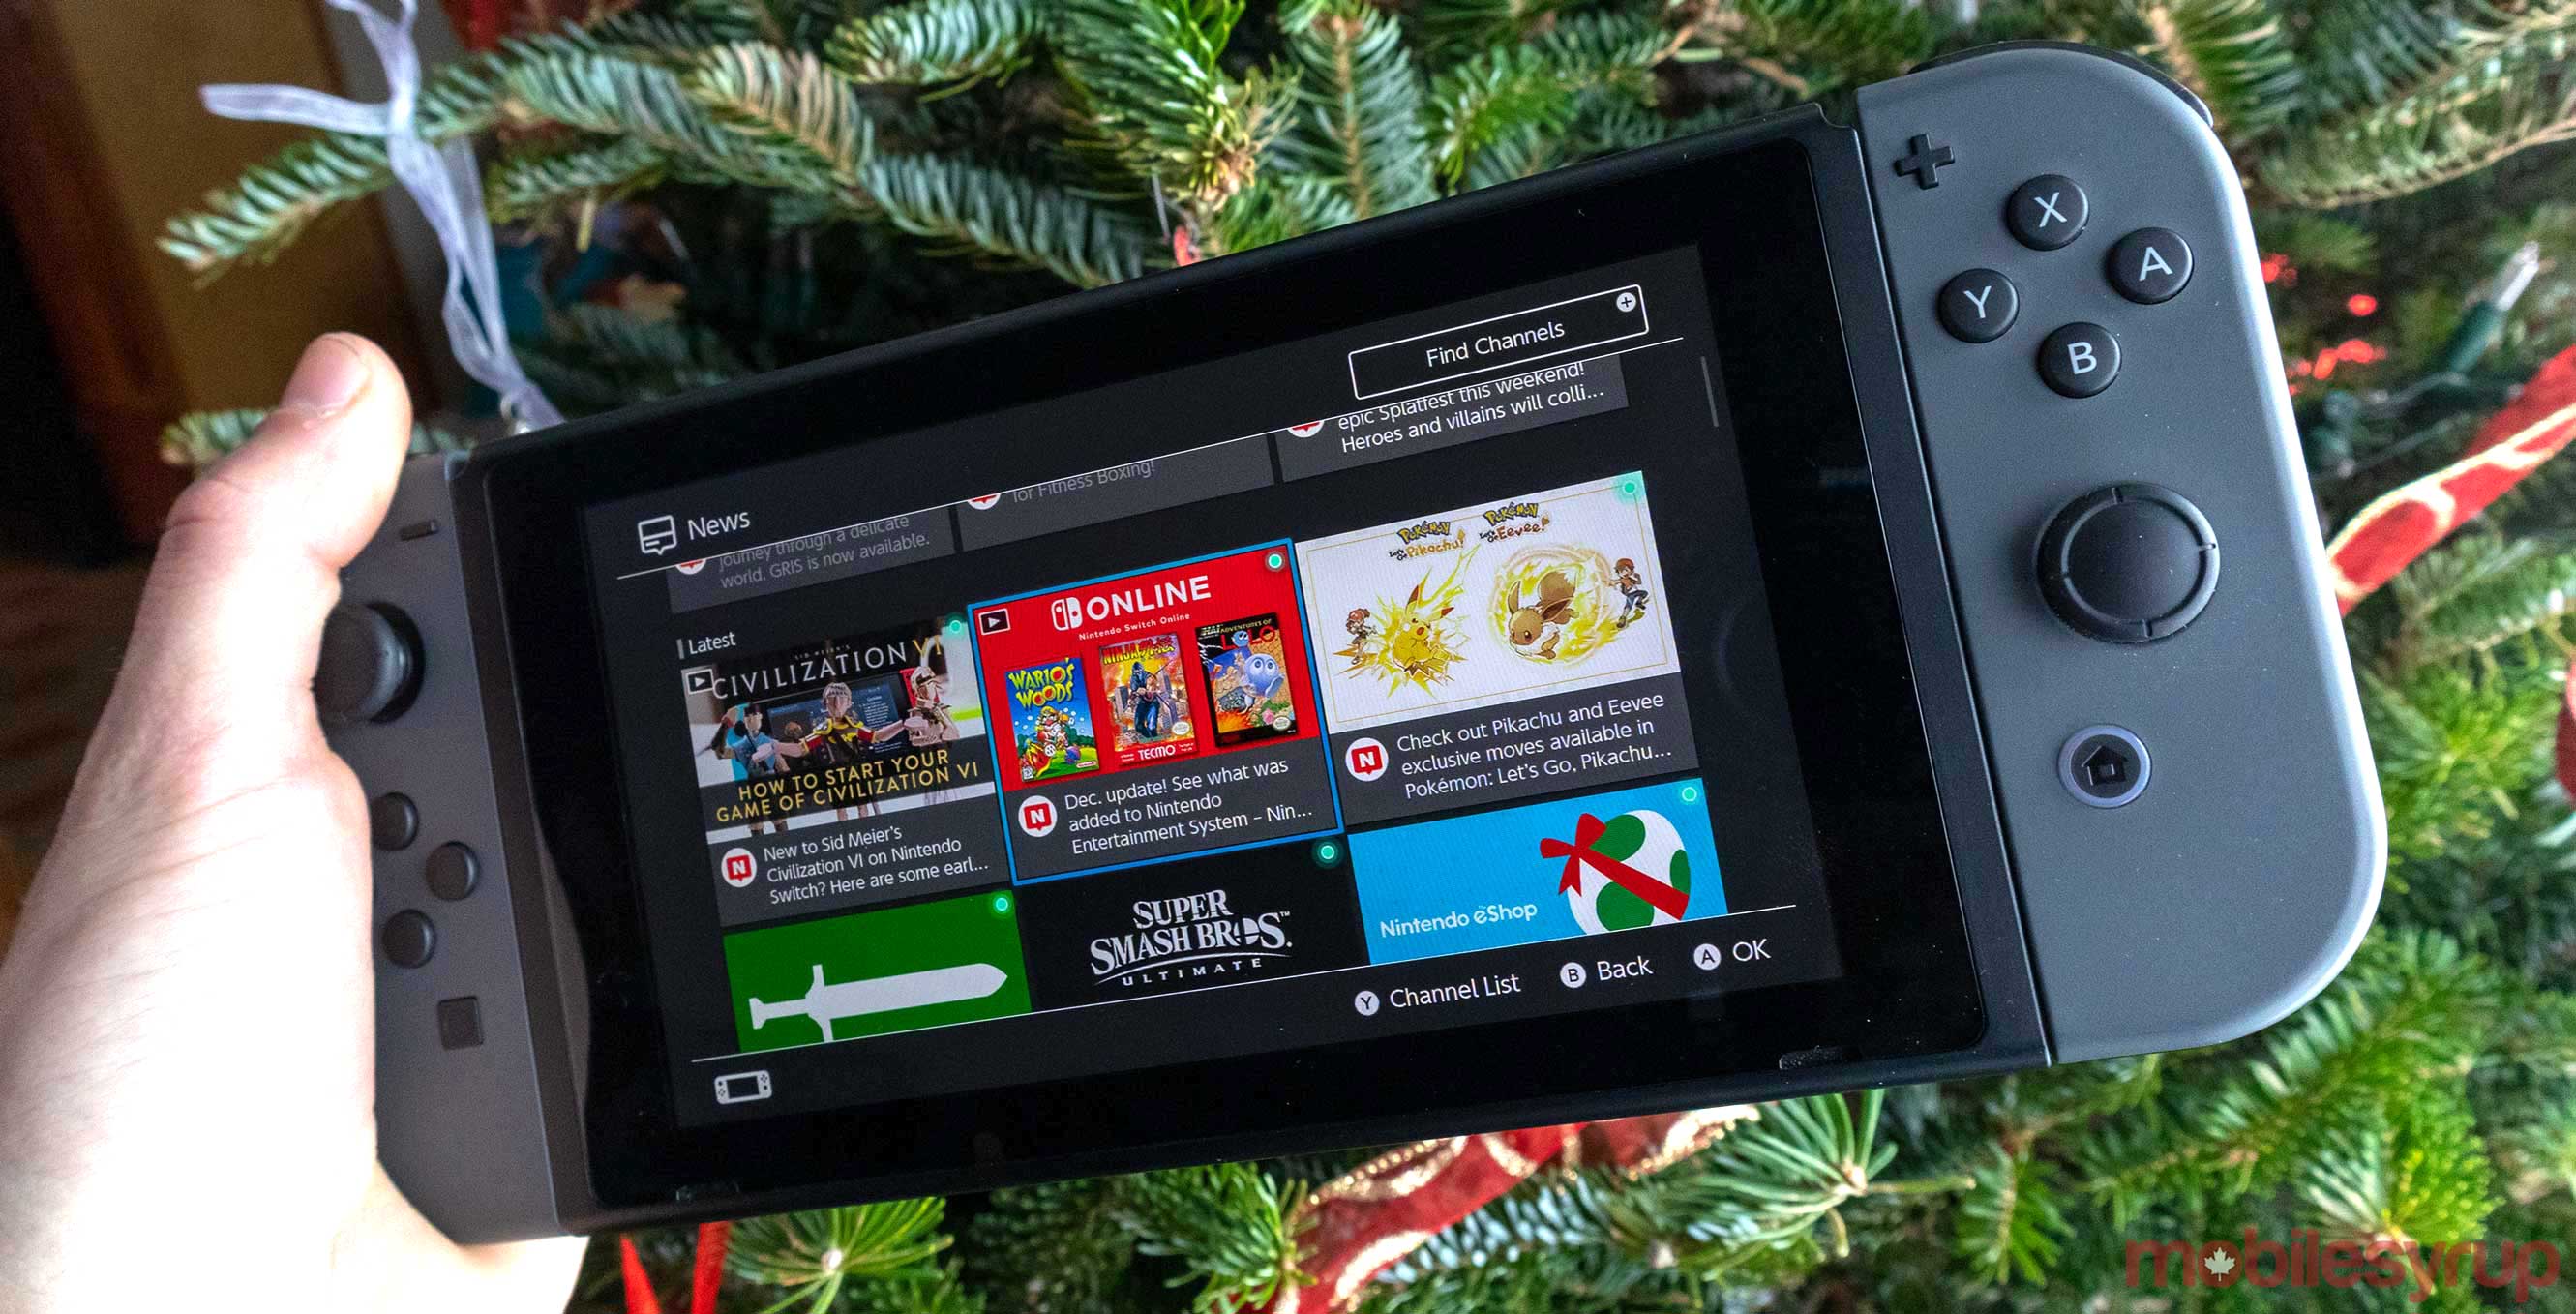 boxing day switch deals